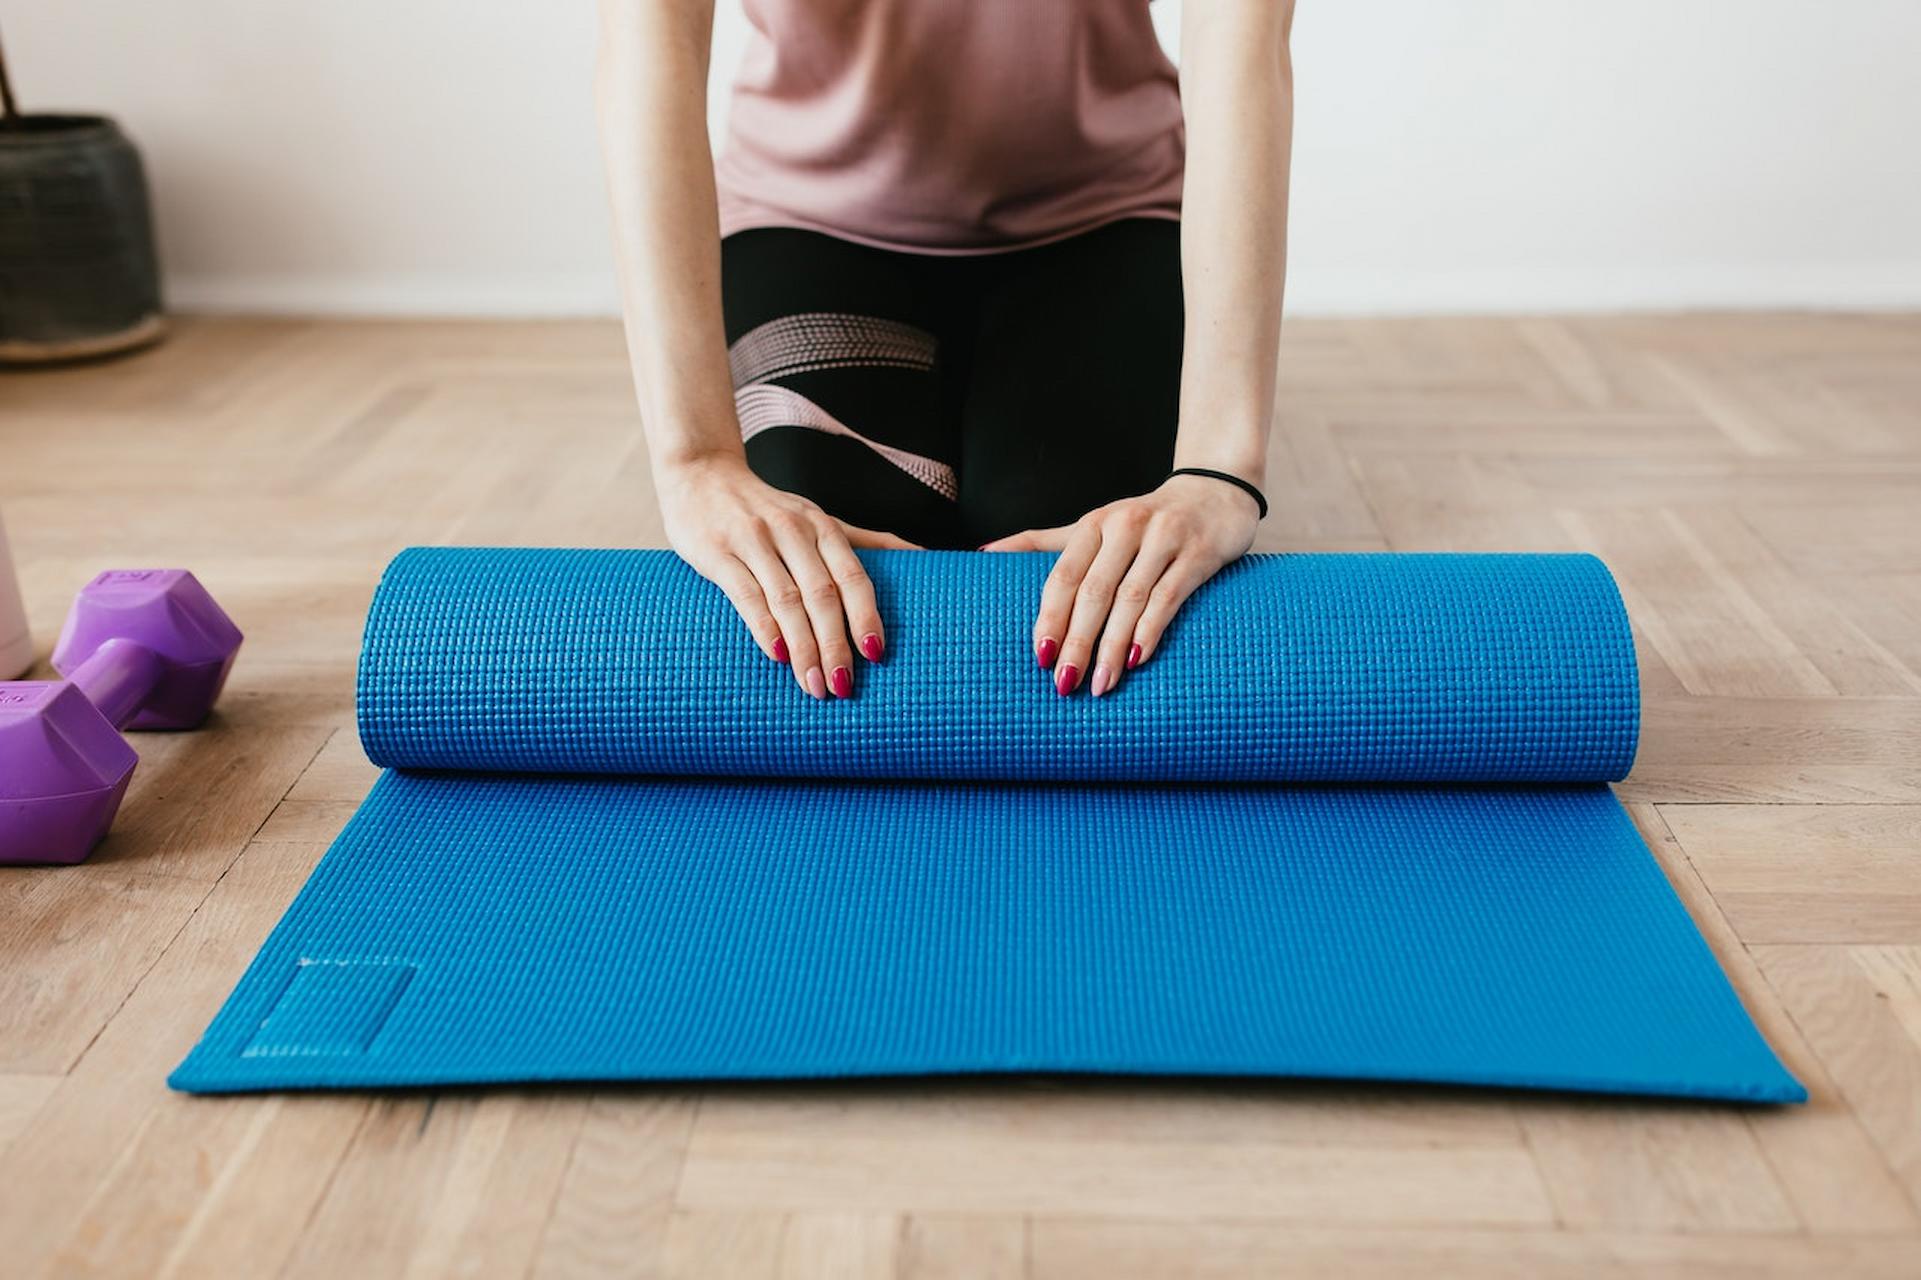 Do We Really Need To Use A Mat While Doing My Everyday Workout?